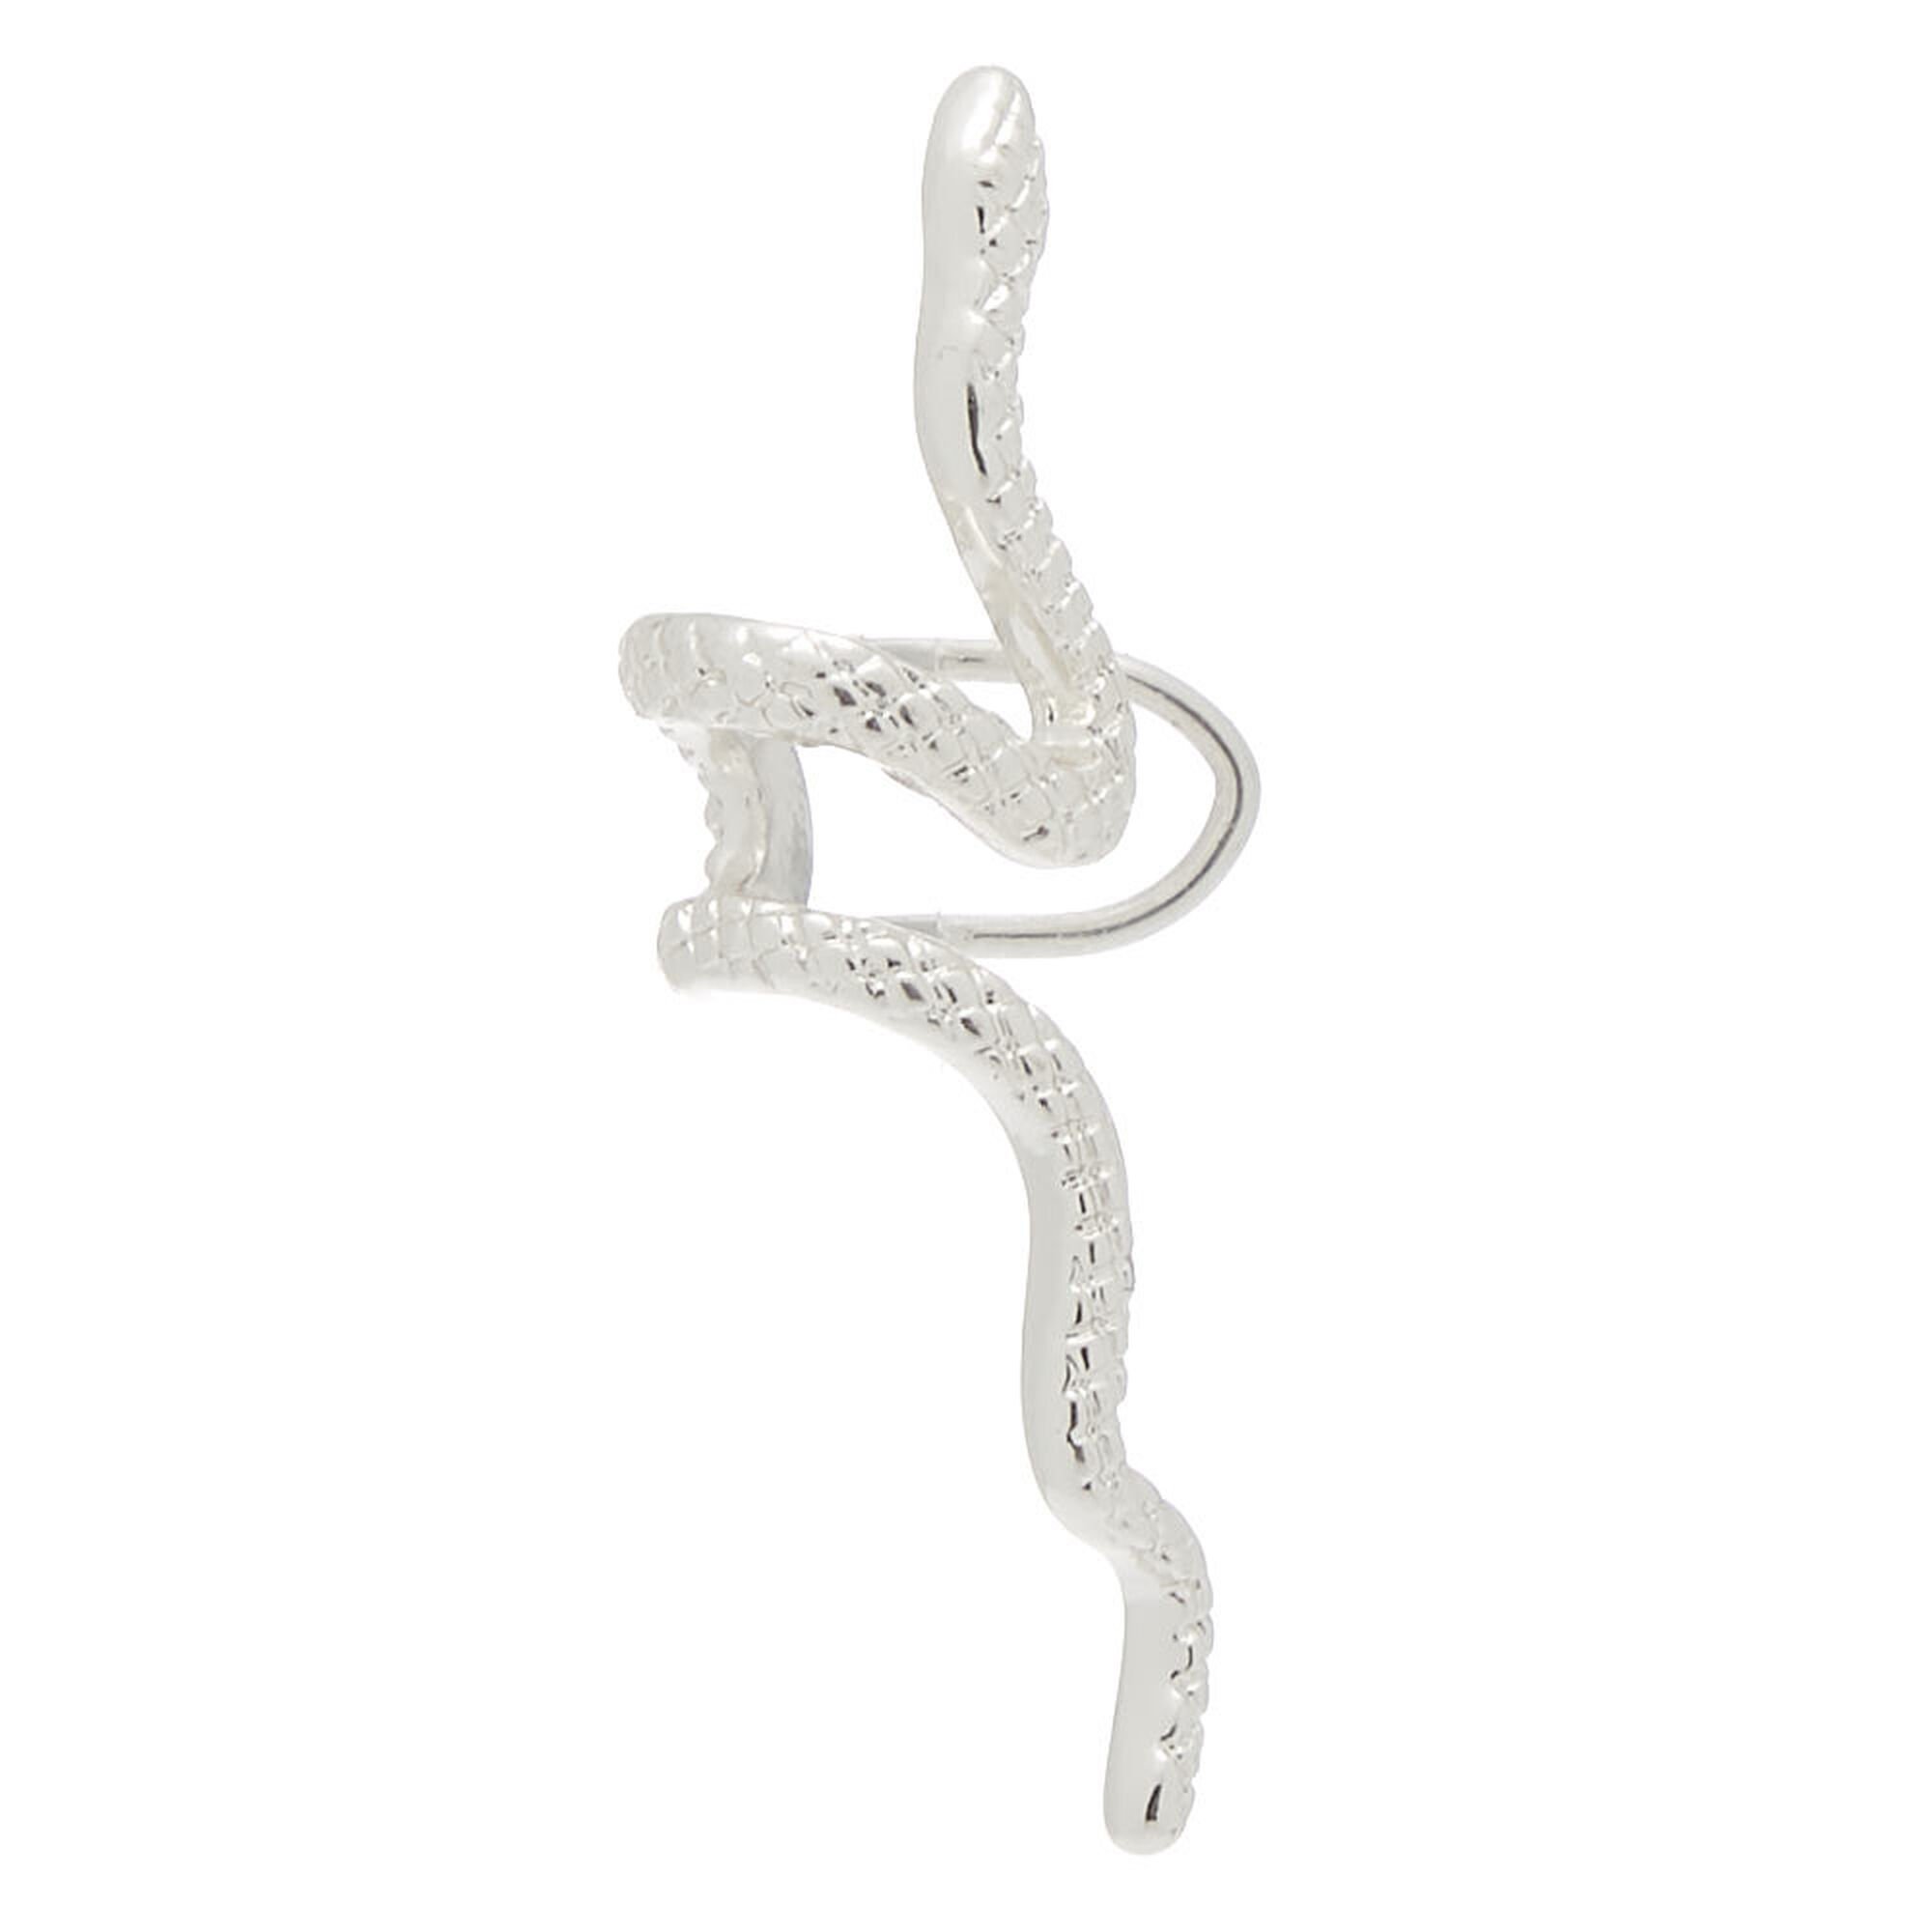 View Claires Snake Ear Cuff Earring Silver information